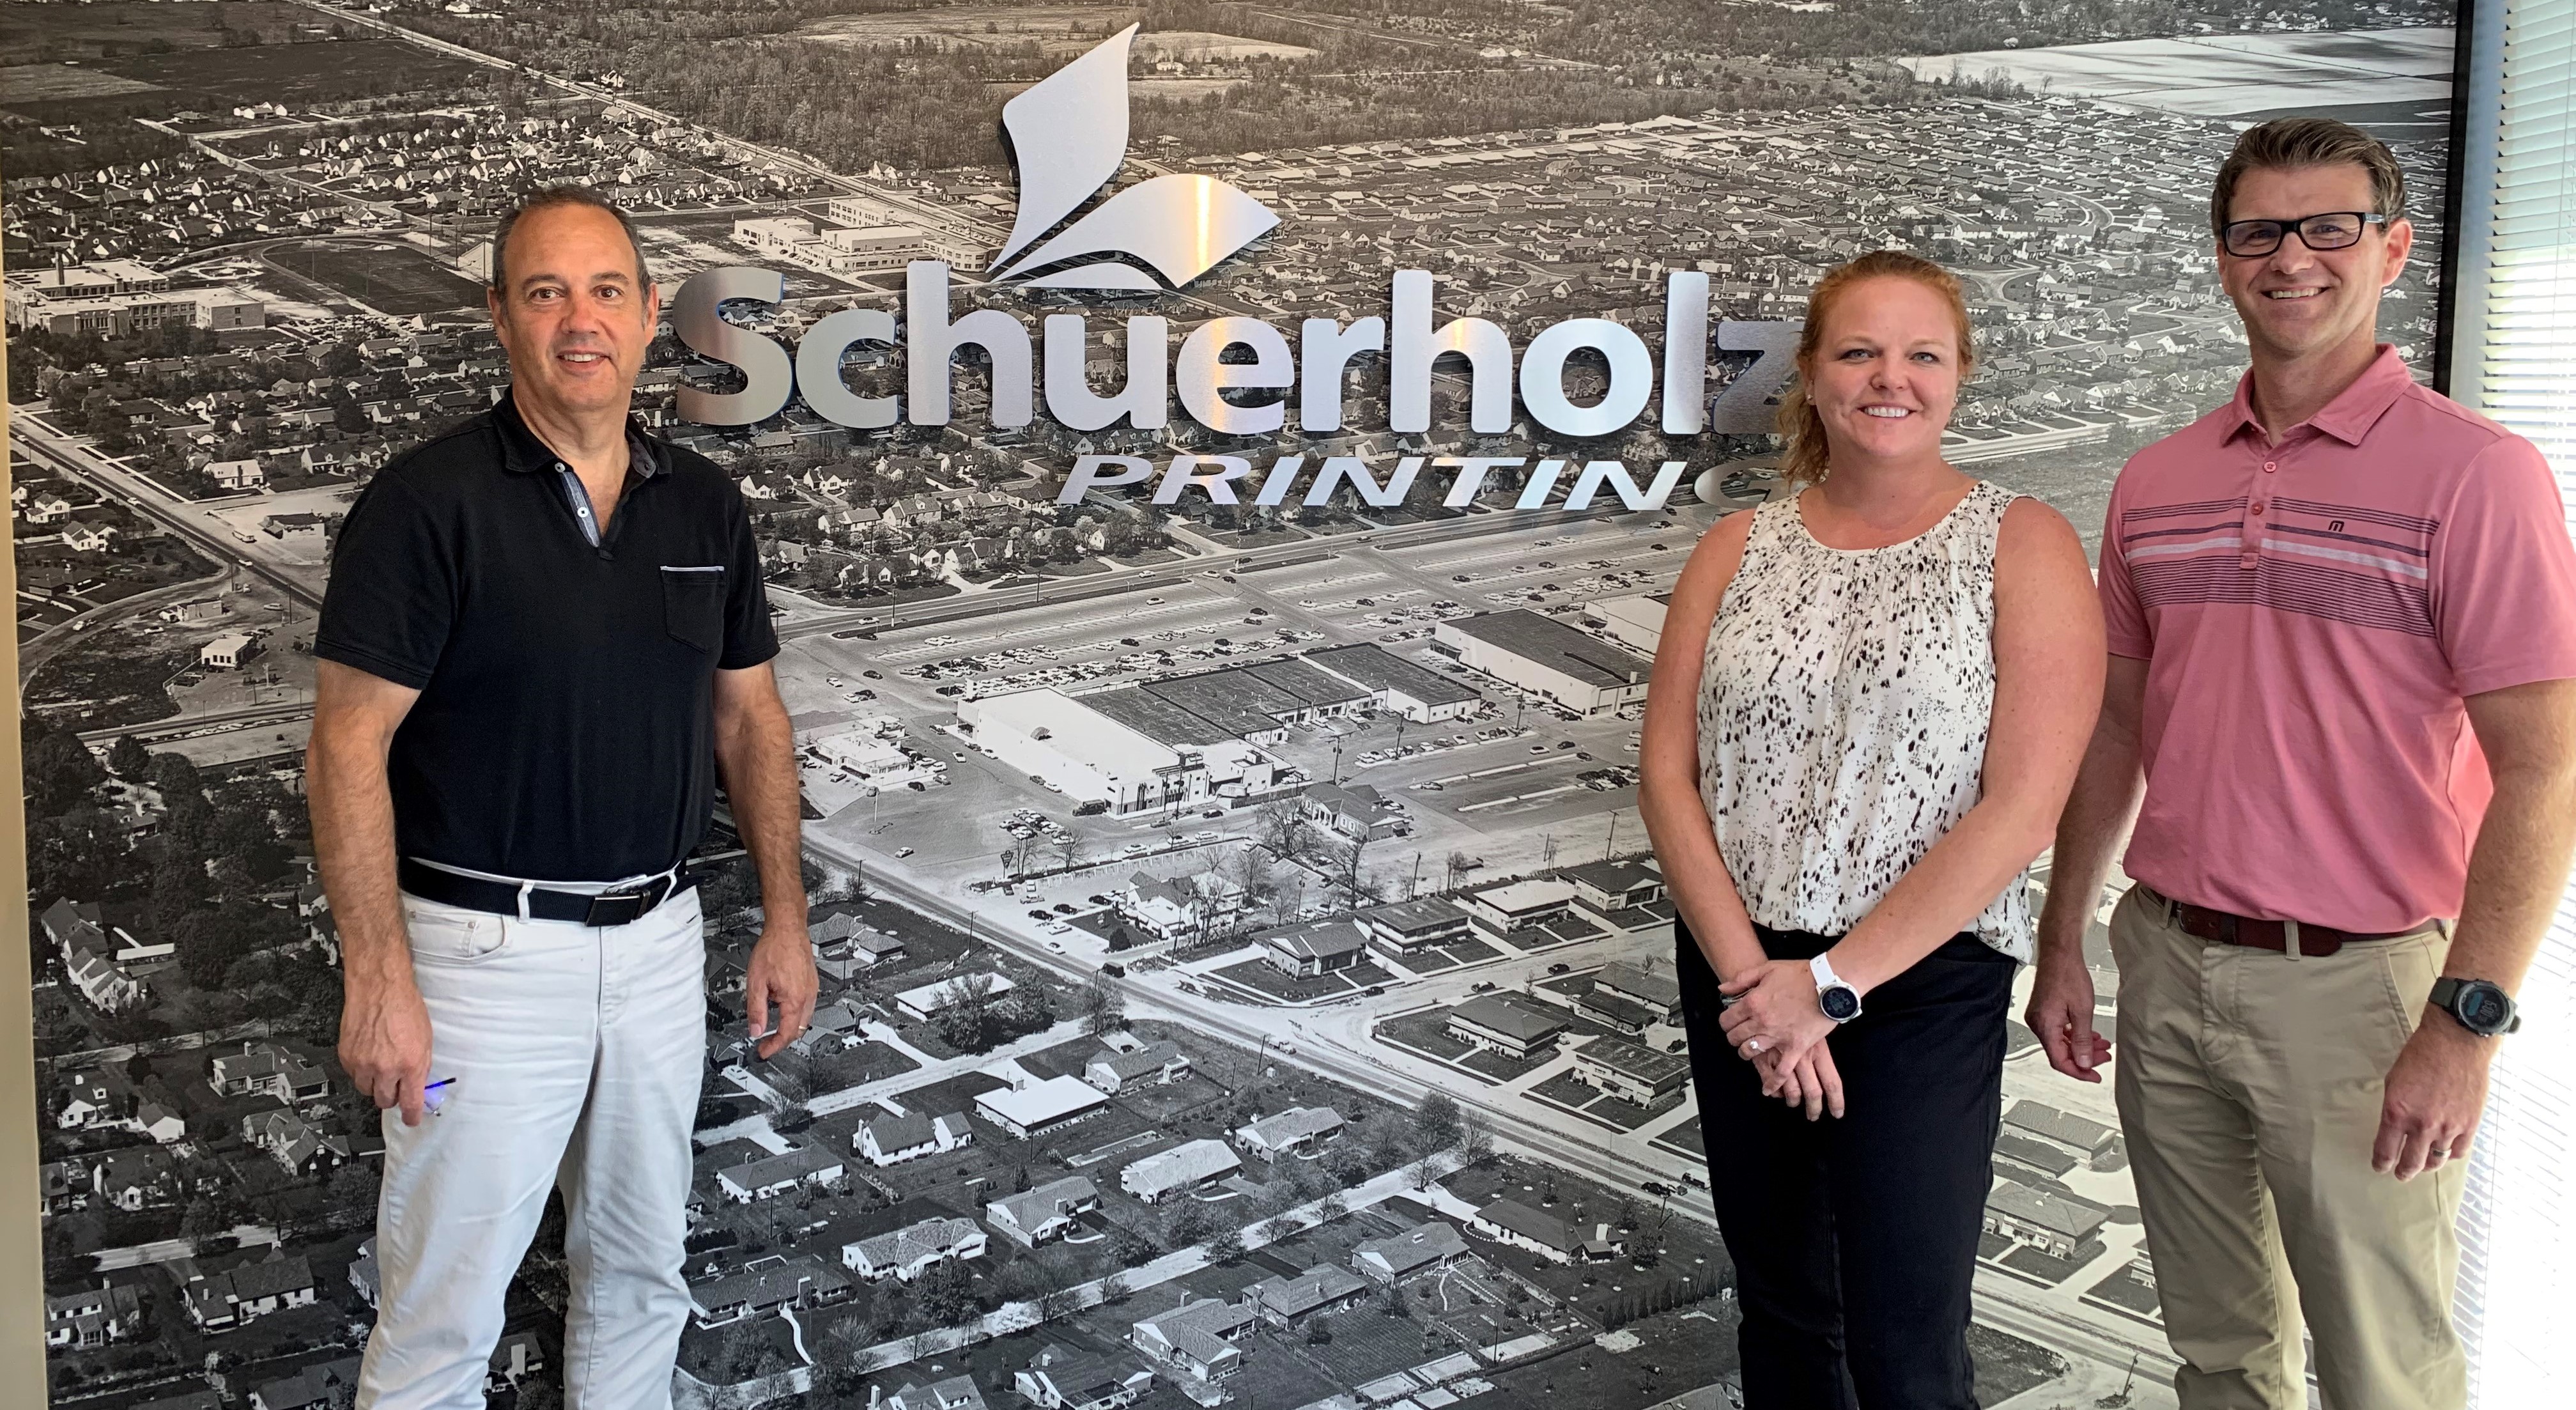 Charley Schuerholz (left) has sold Schuerholz Printing to Nikki and Brandon Jasper (right). CONTRIBUTED